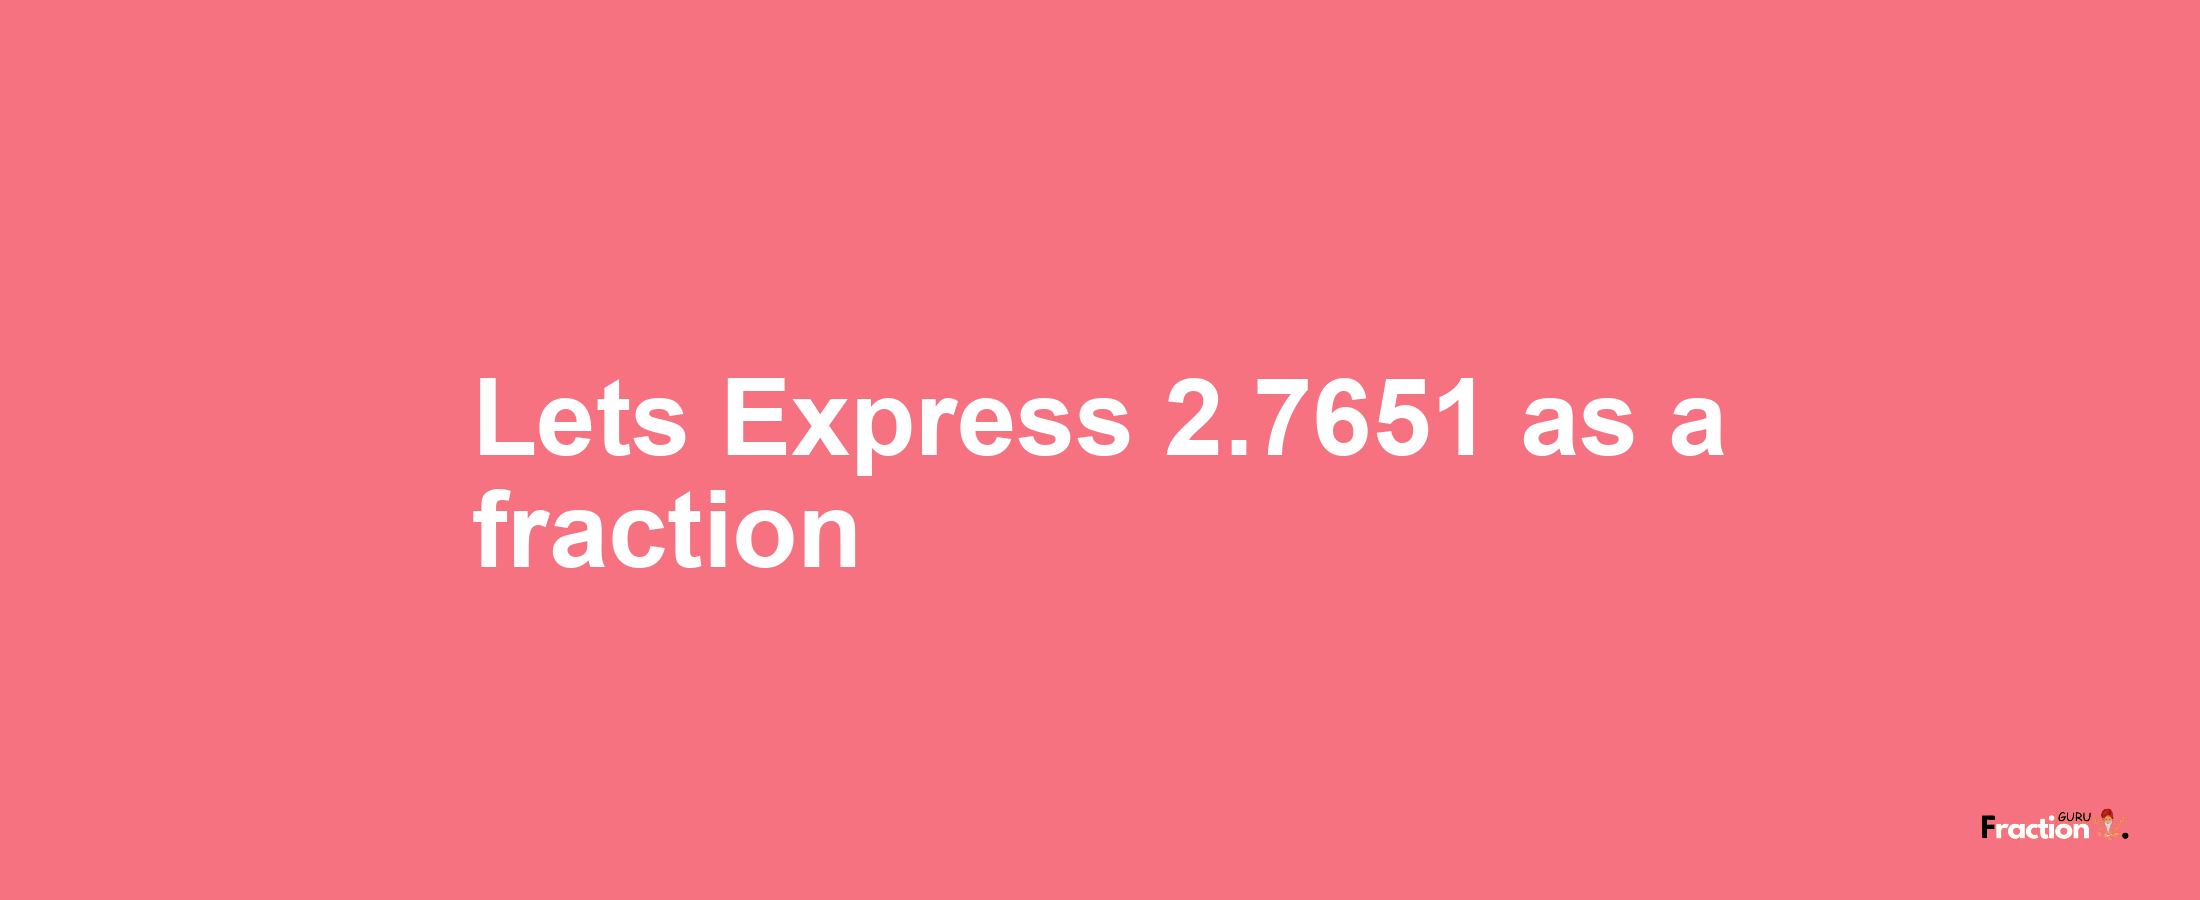 Lets Express 2.7651 as afraction